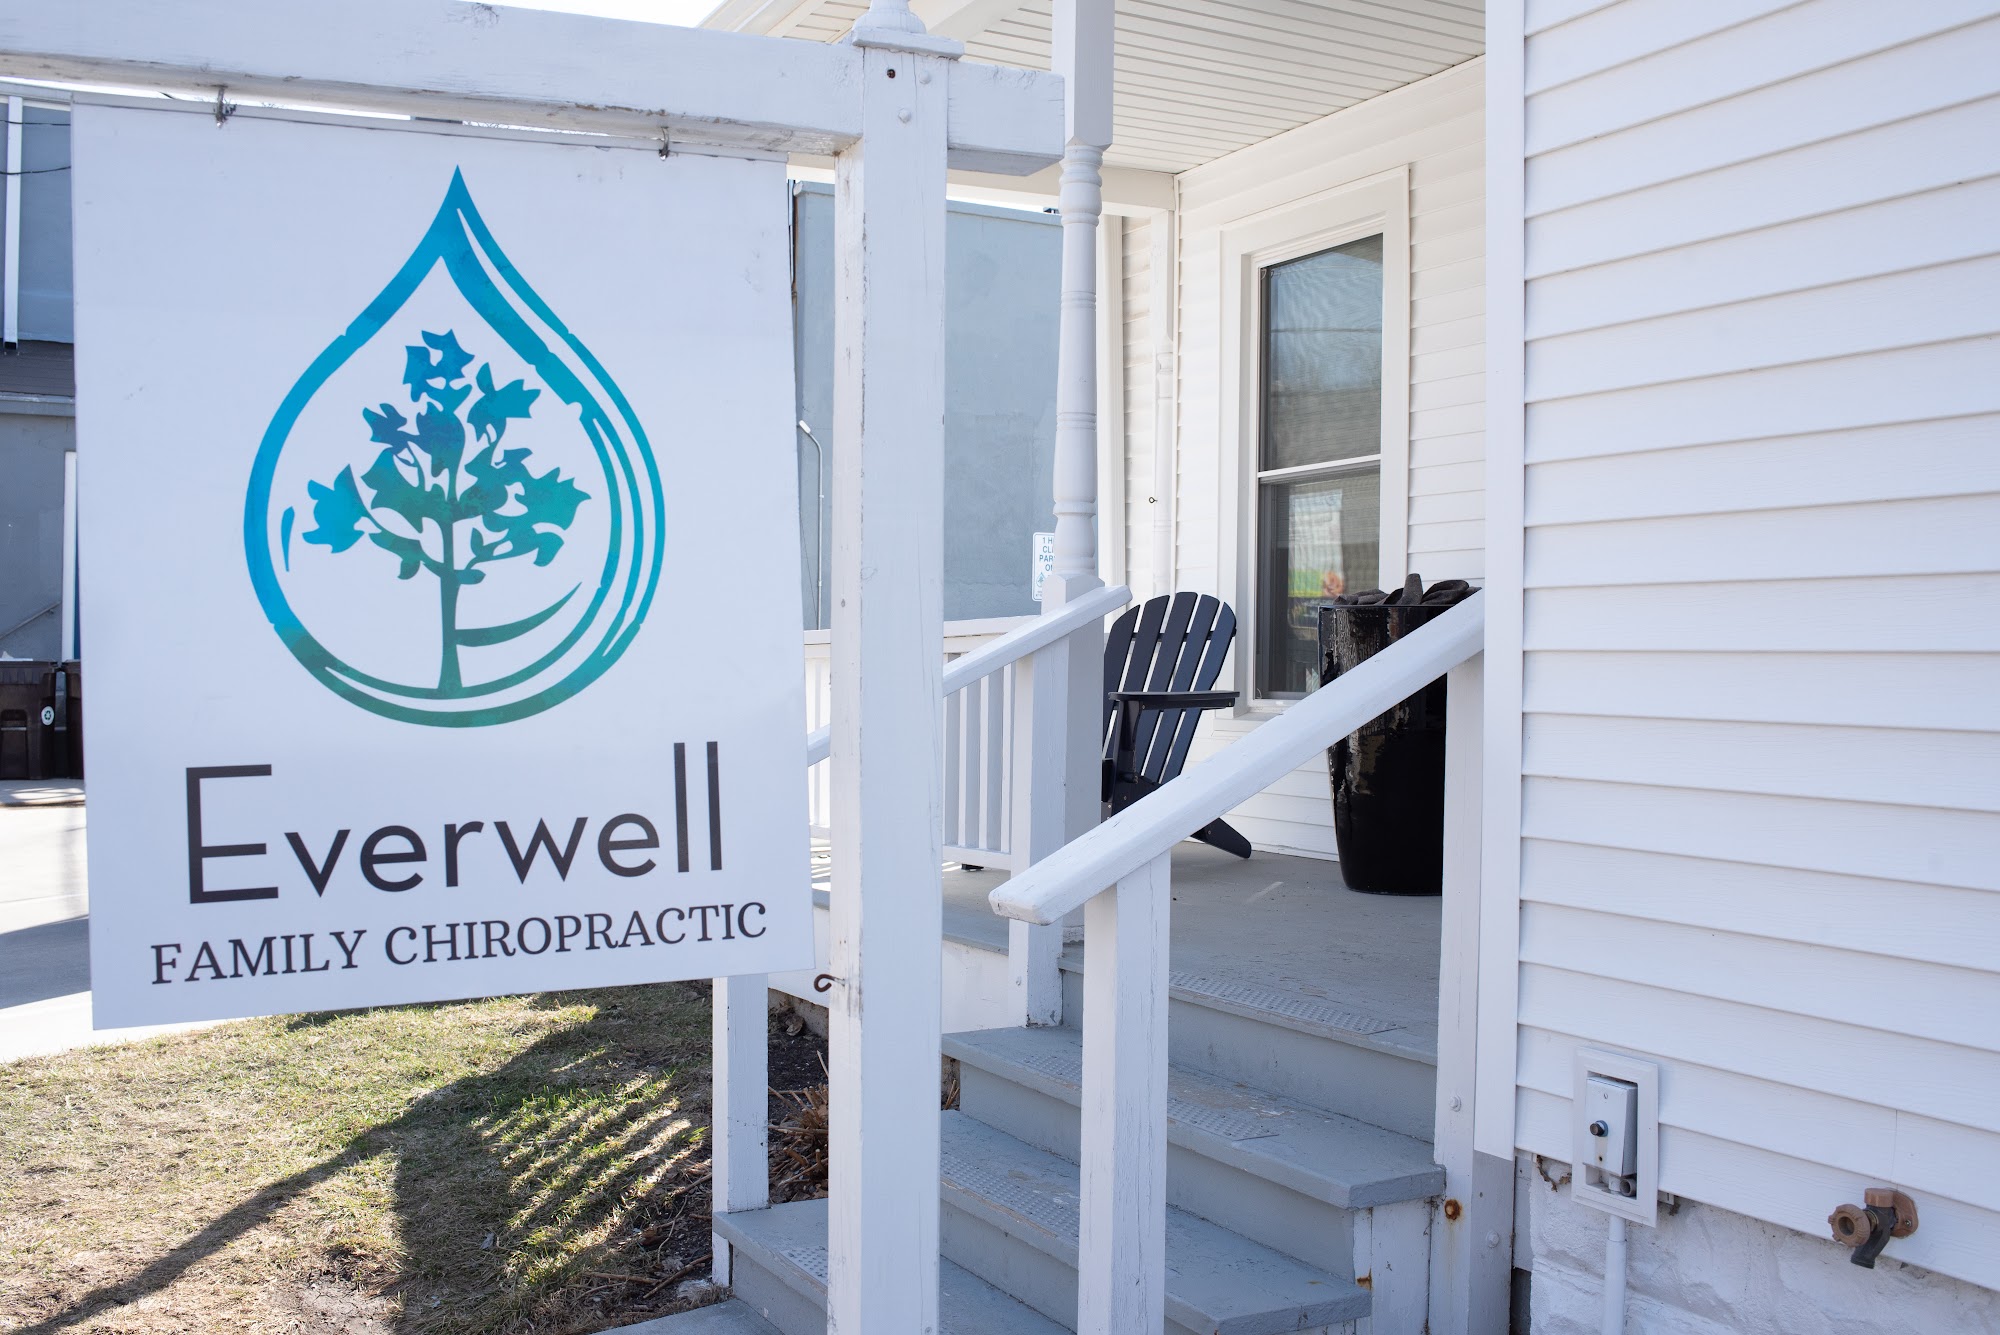 Everwell Family Chiropractic